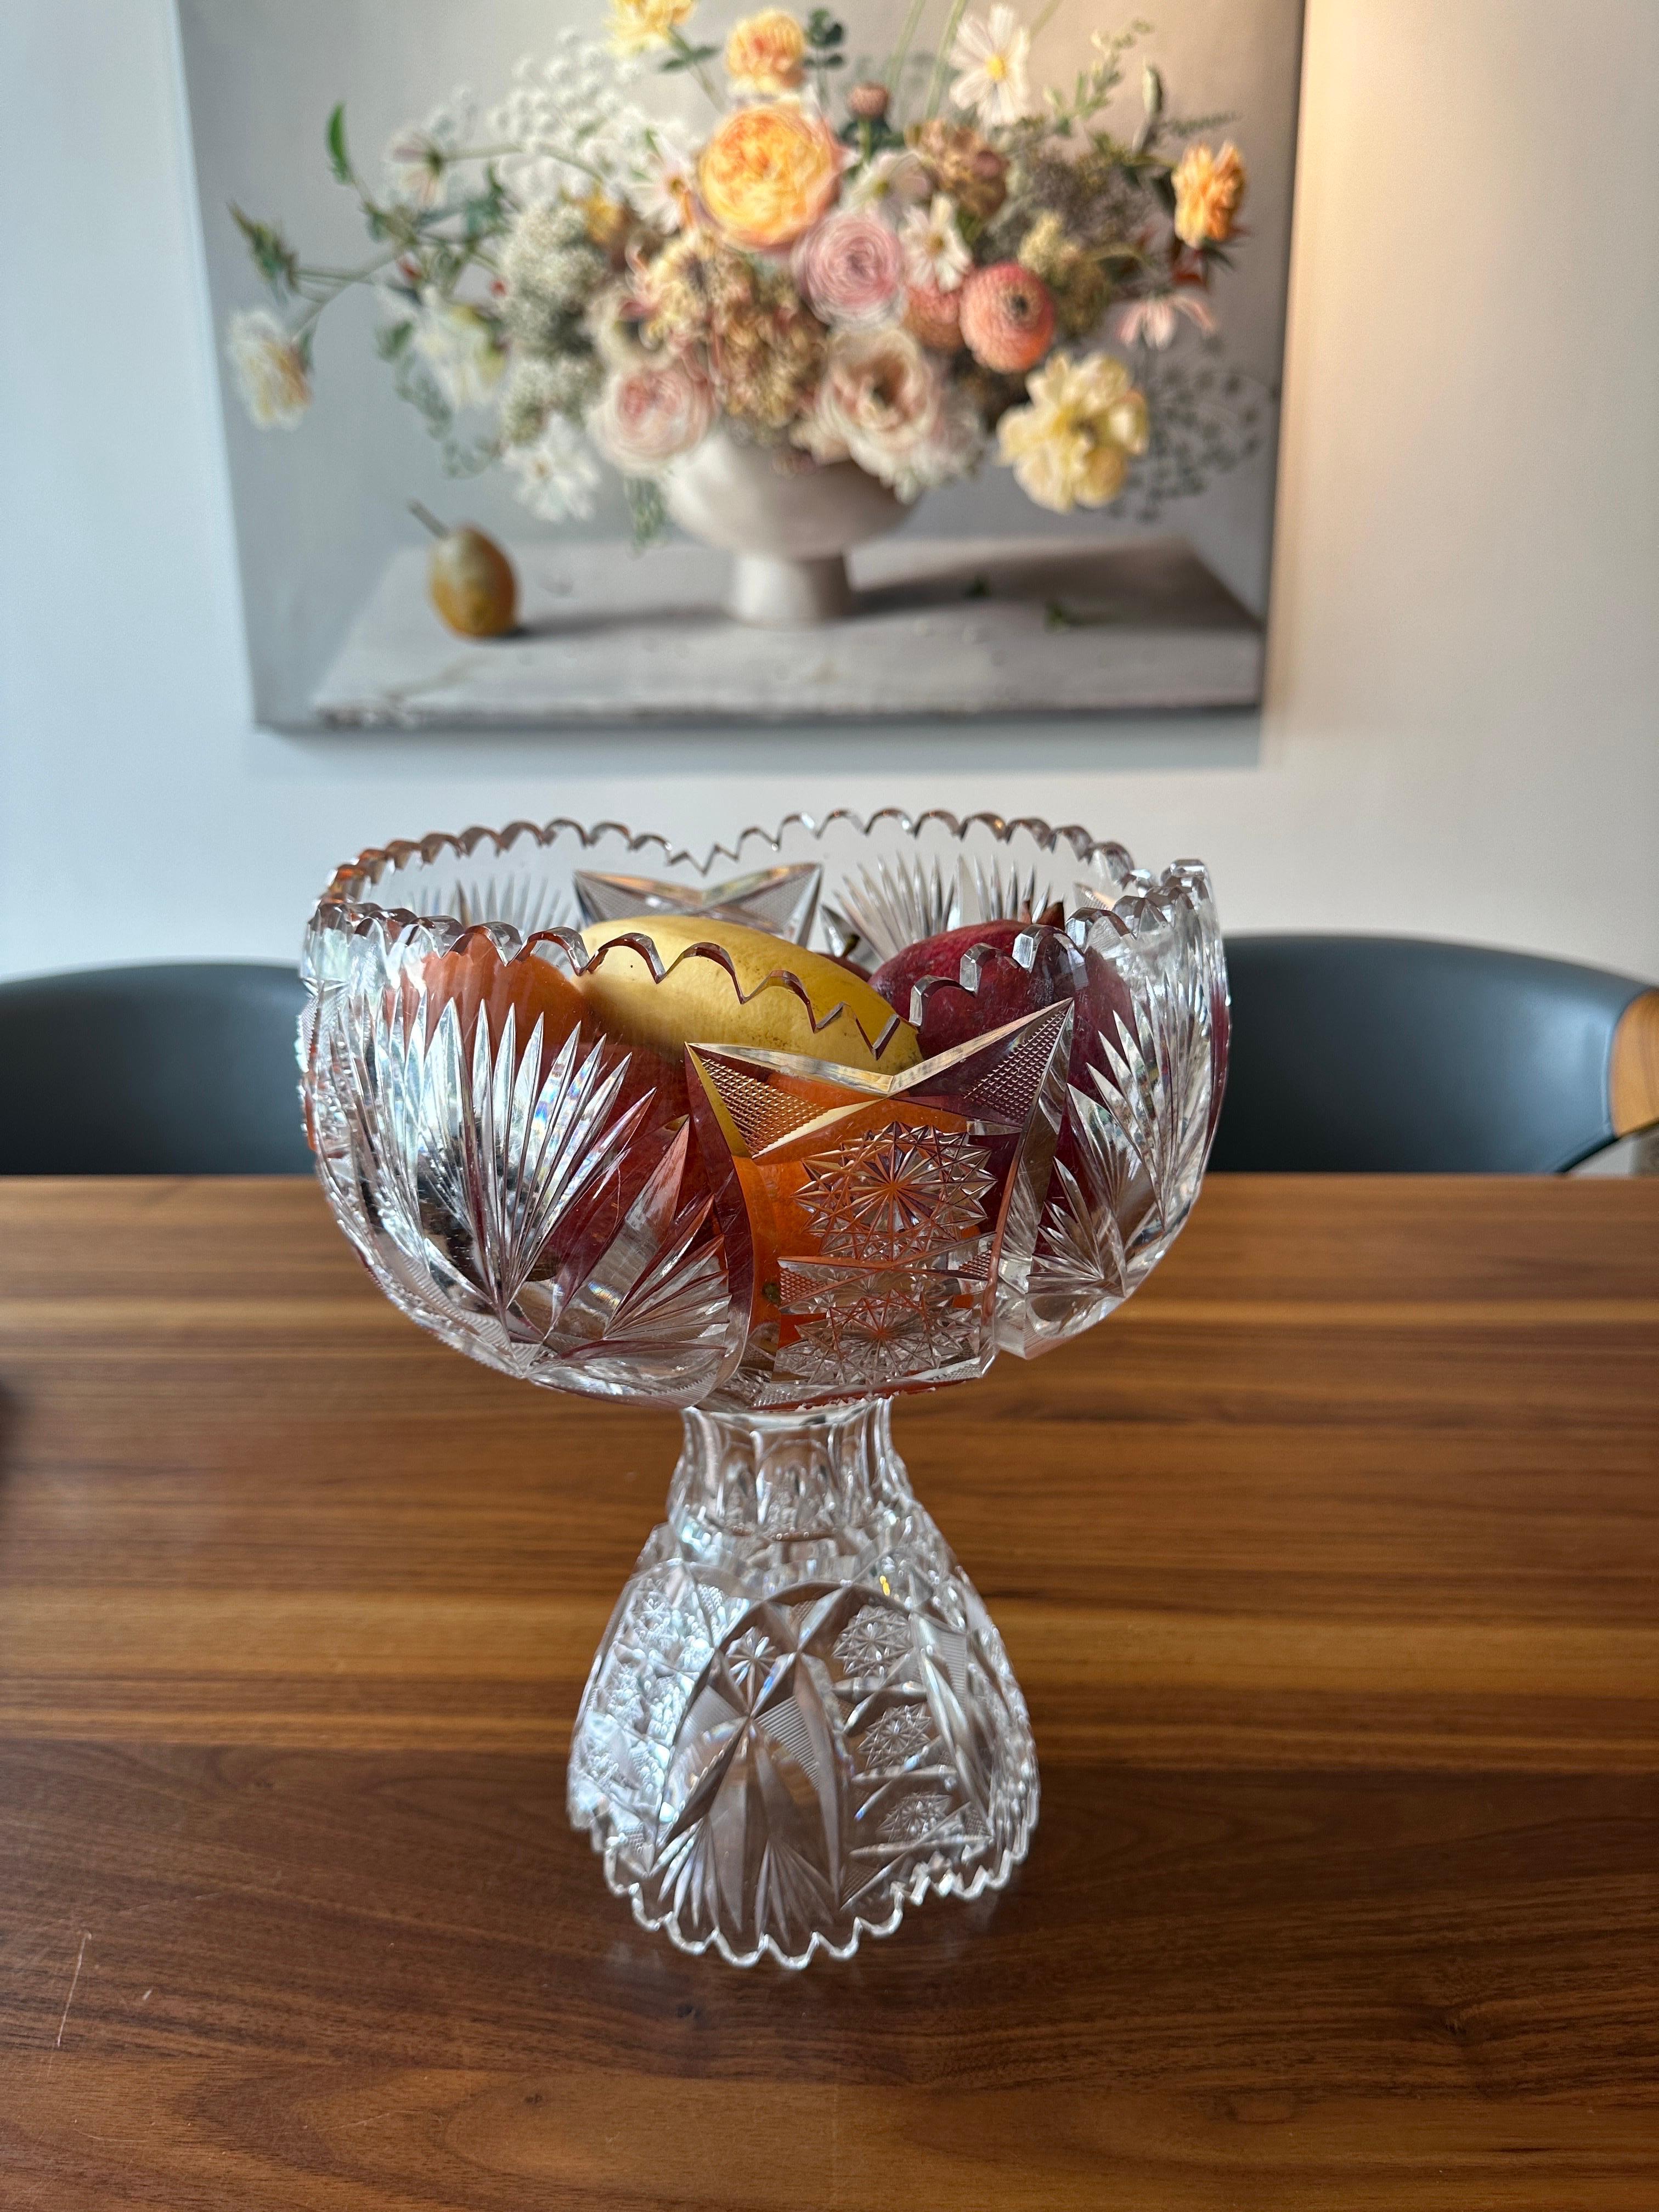 This serve bowl can be separated into two pieces. Turning it into a bowl and vase, this practical and beautiful crystal glassware was made around 1900-1920.